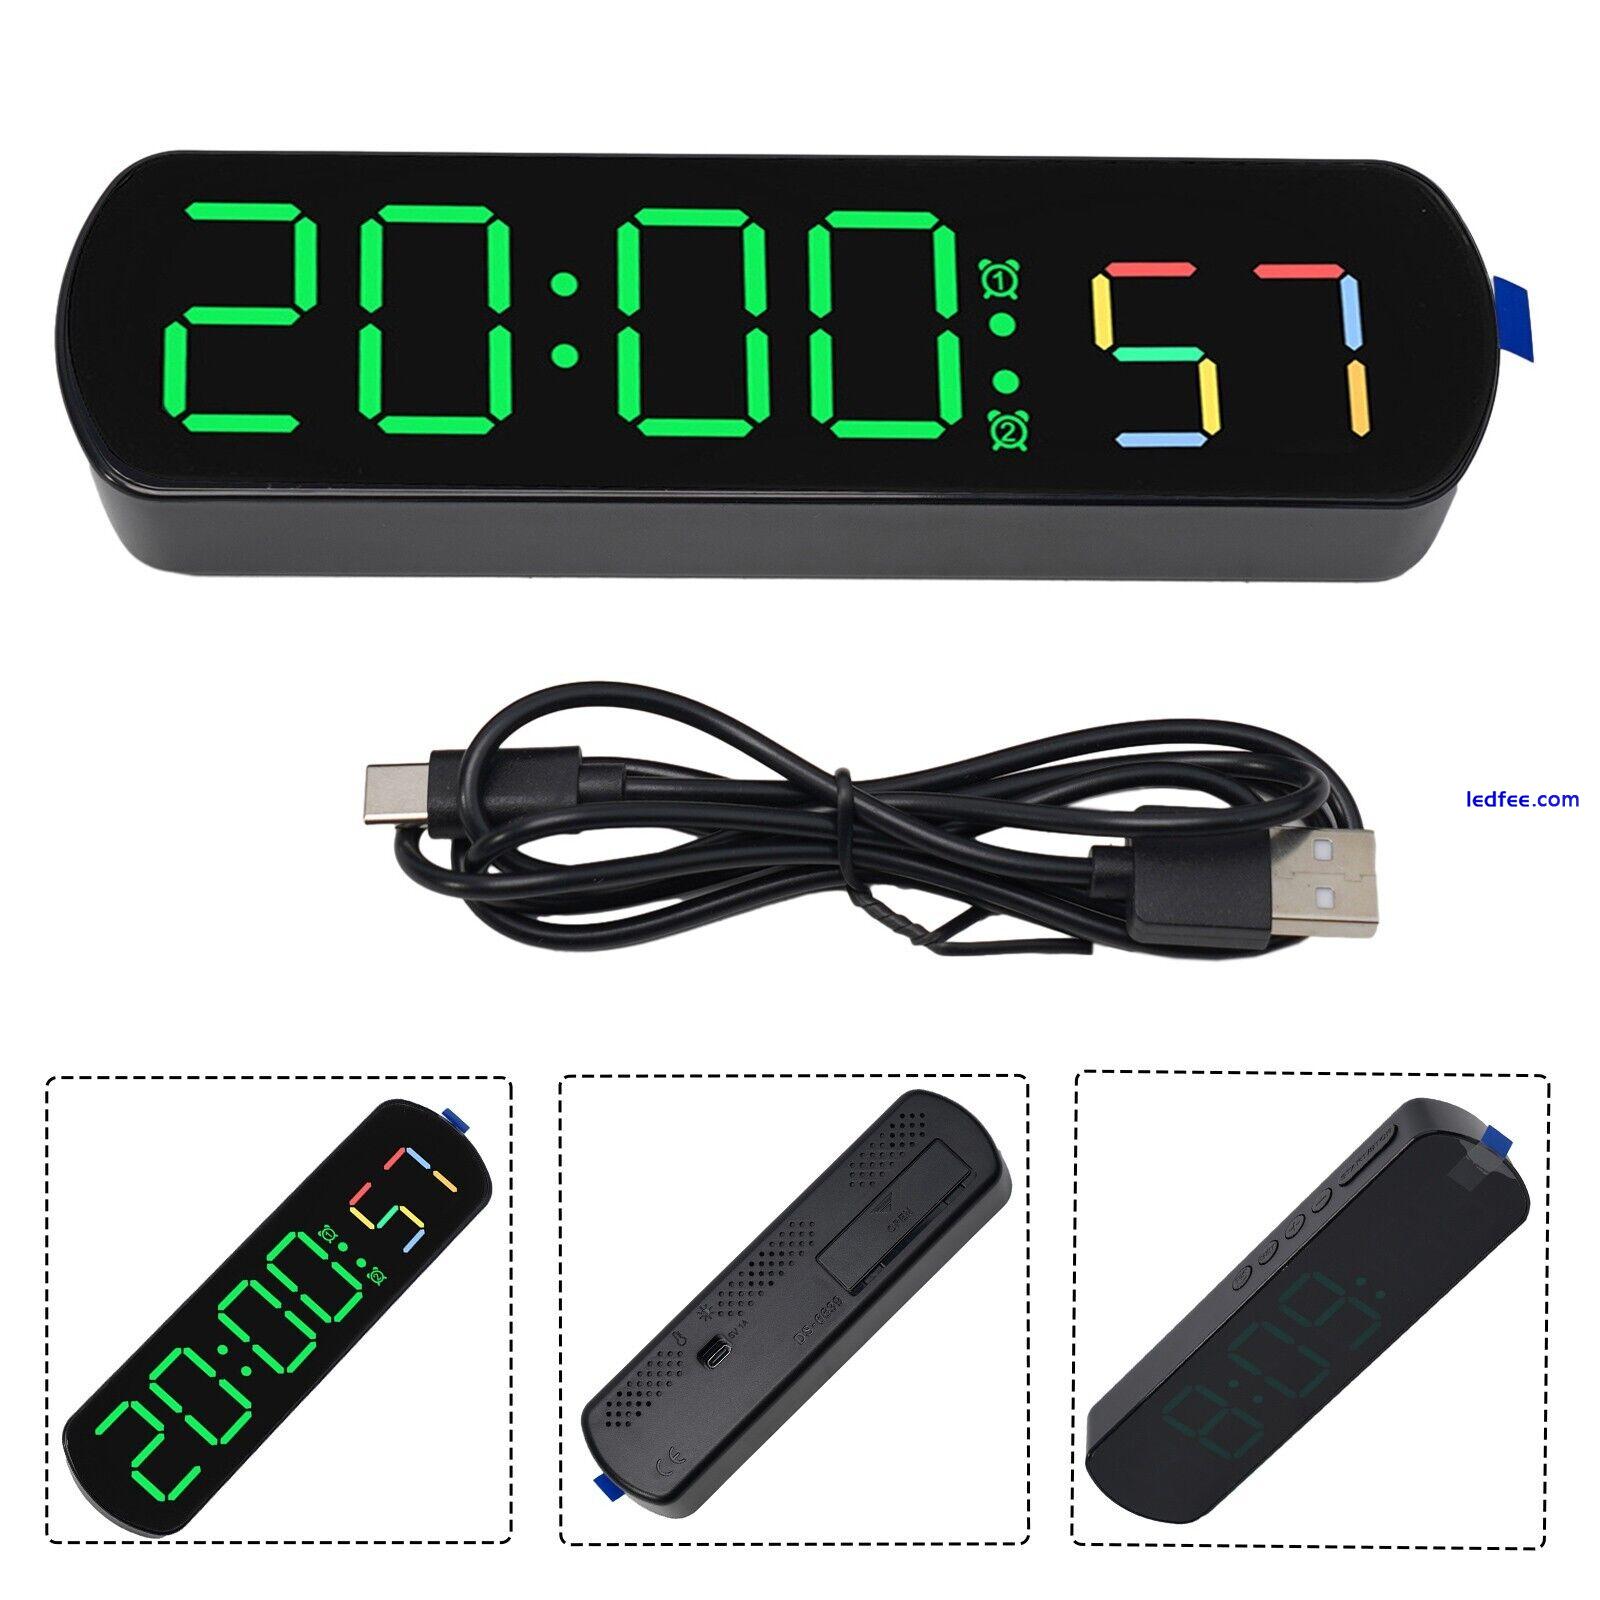 Desktop LED Alarm Clock with Temperature/Humidity Display & Timer Feature 1 